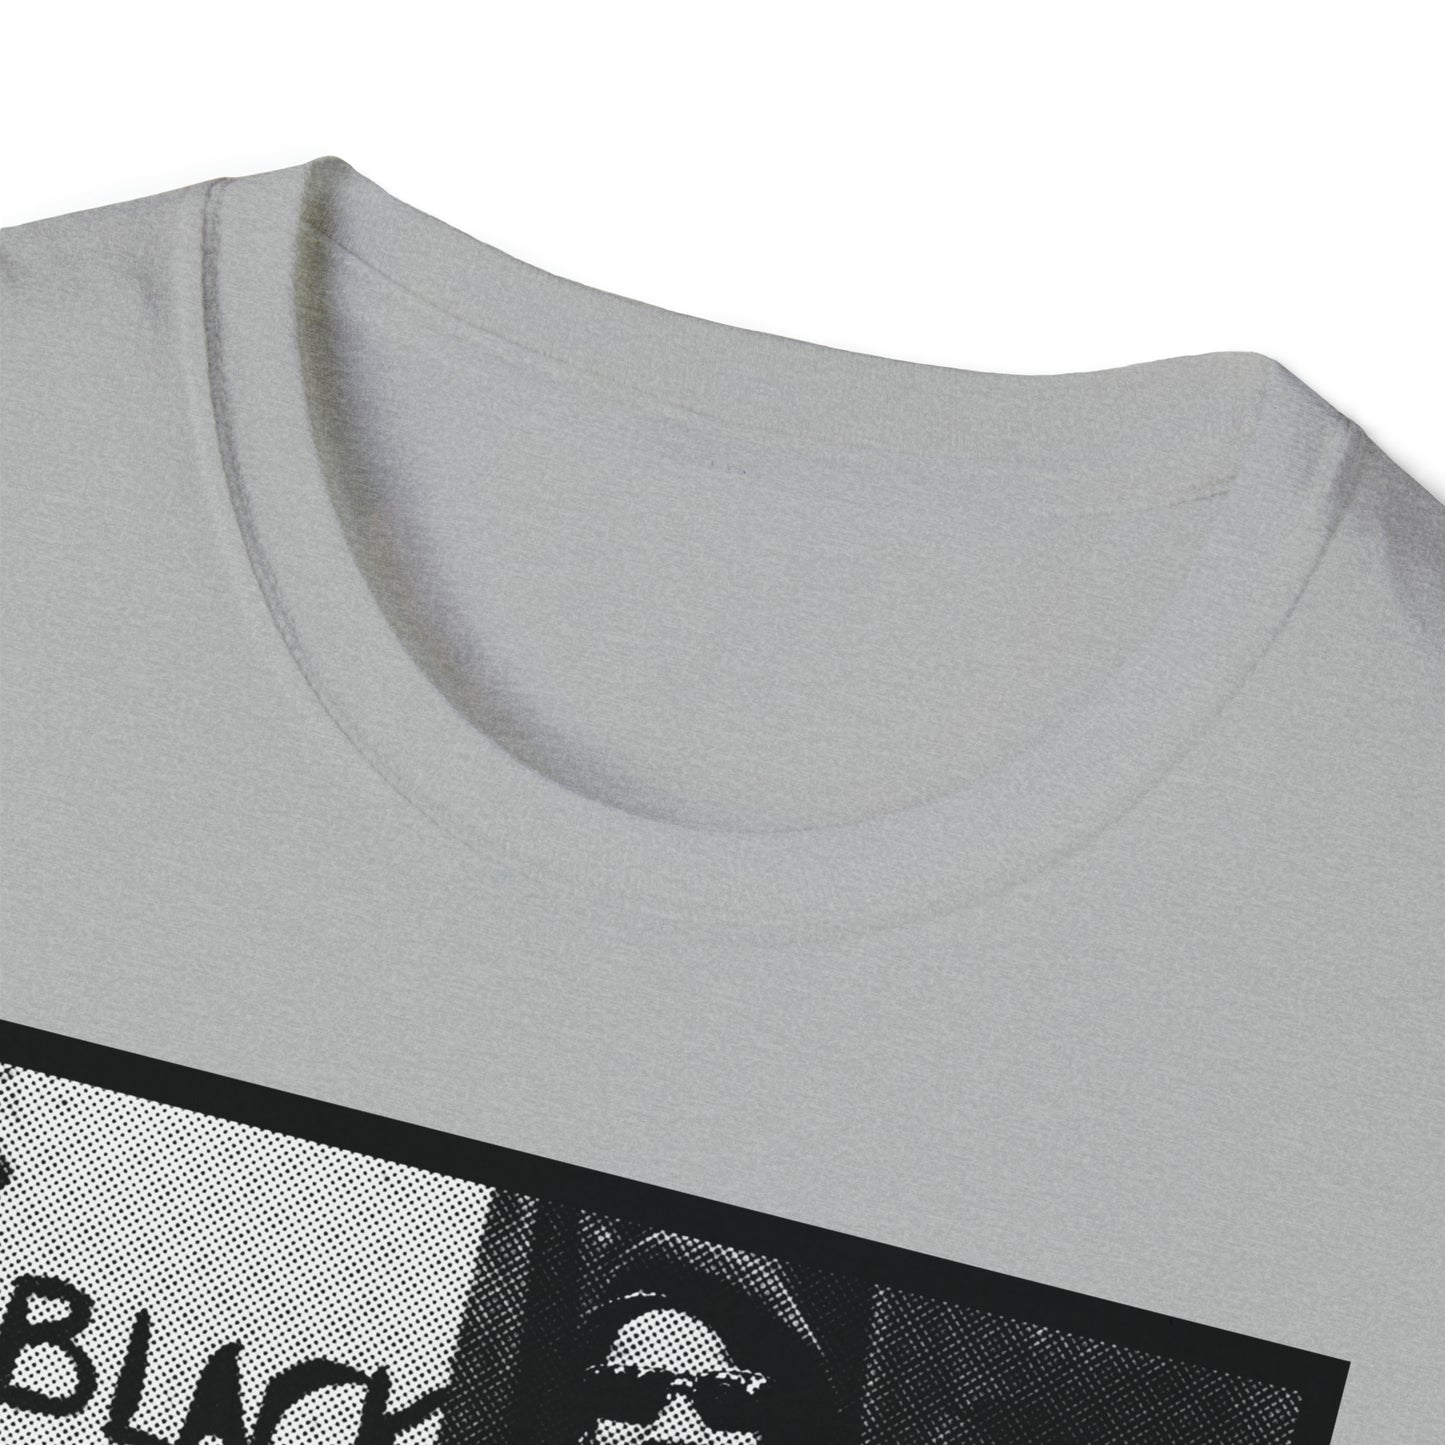 Black Panther Black History Tee  -Black Culture Tee  - Activism Apparel, Softstyle t shirt